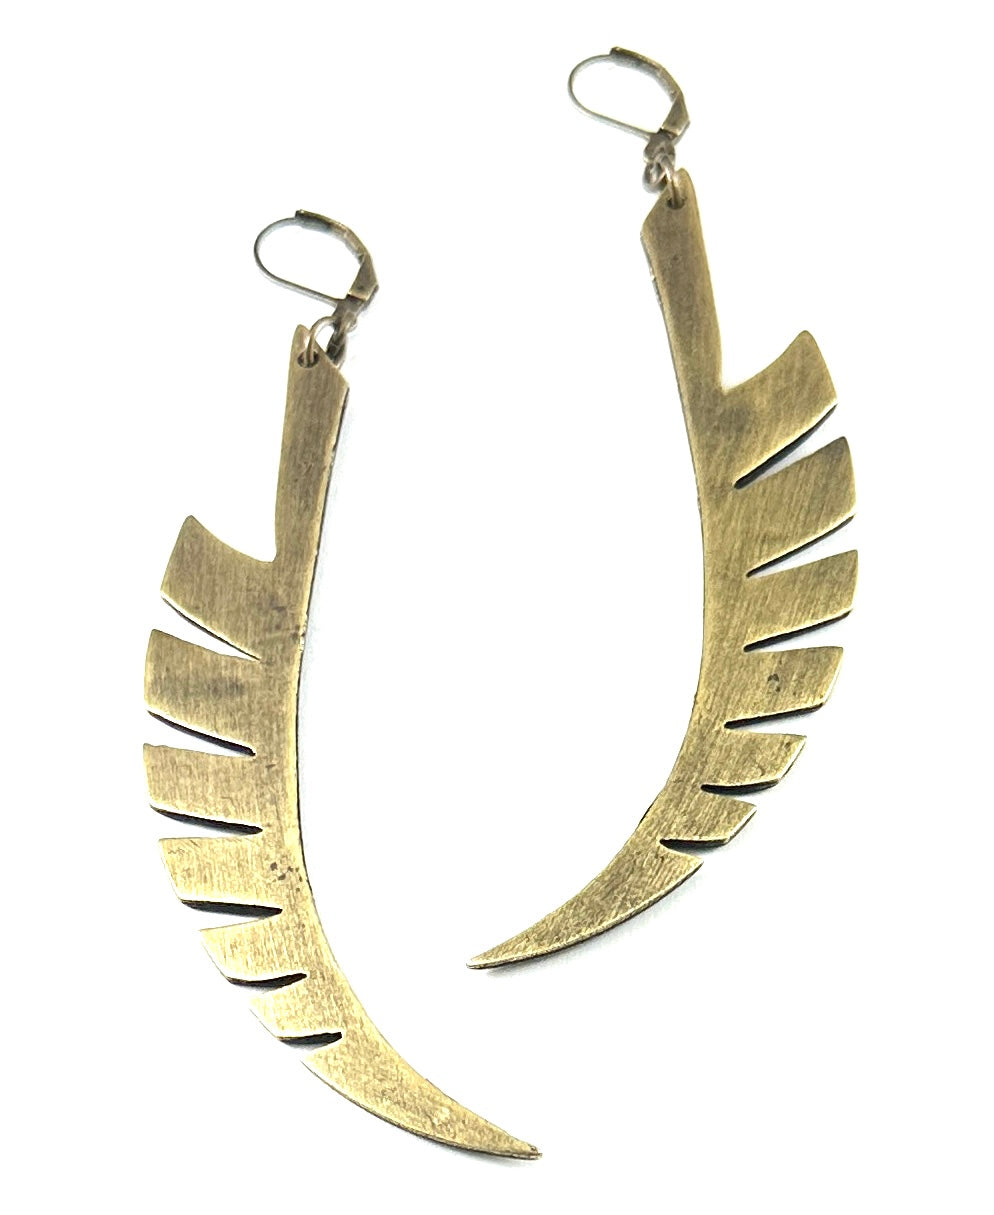 Vintage Casting Collection - Fern Earrings